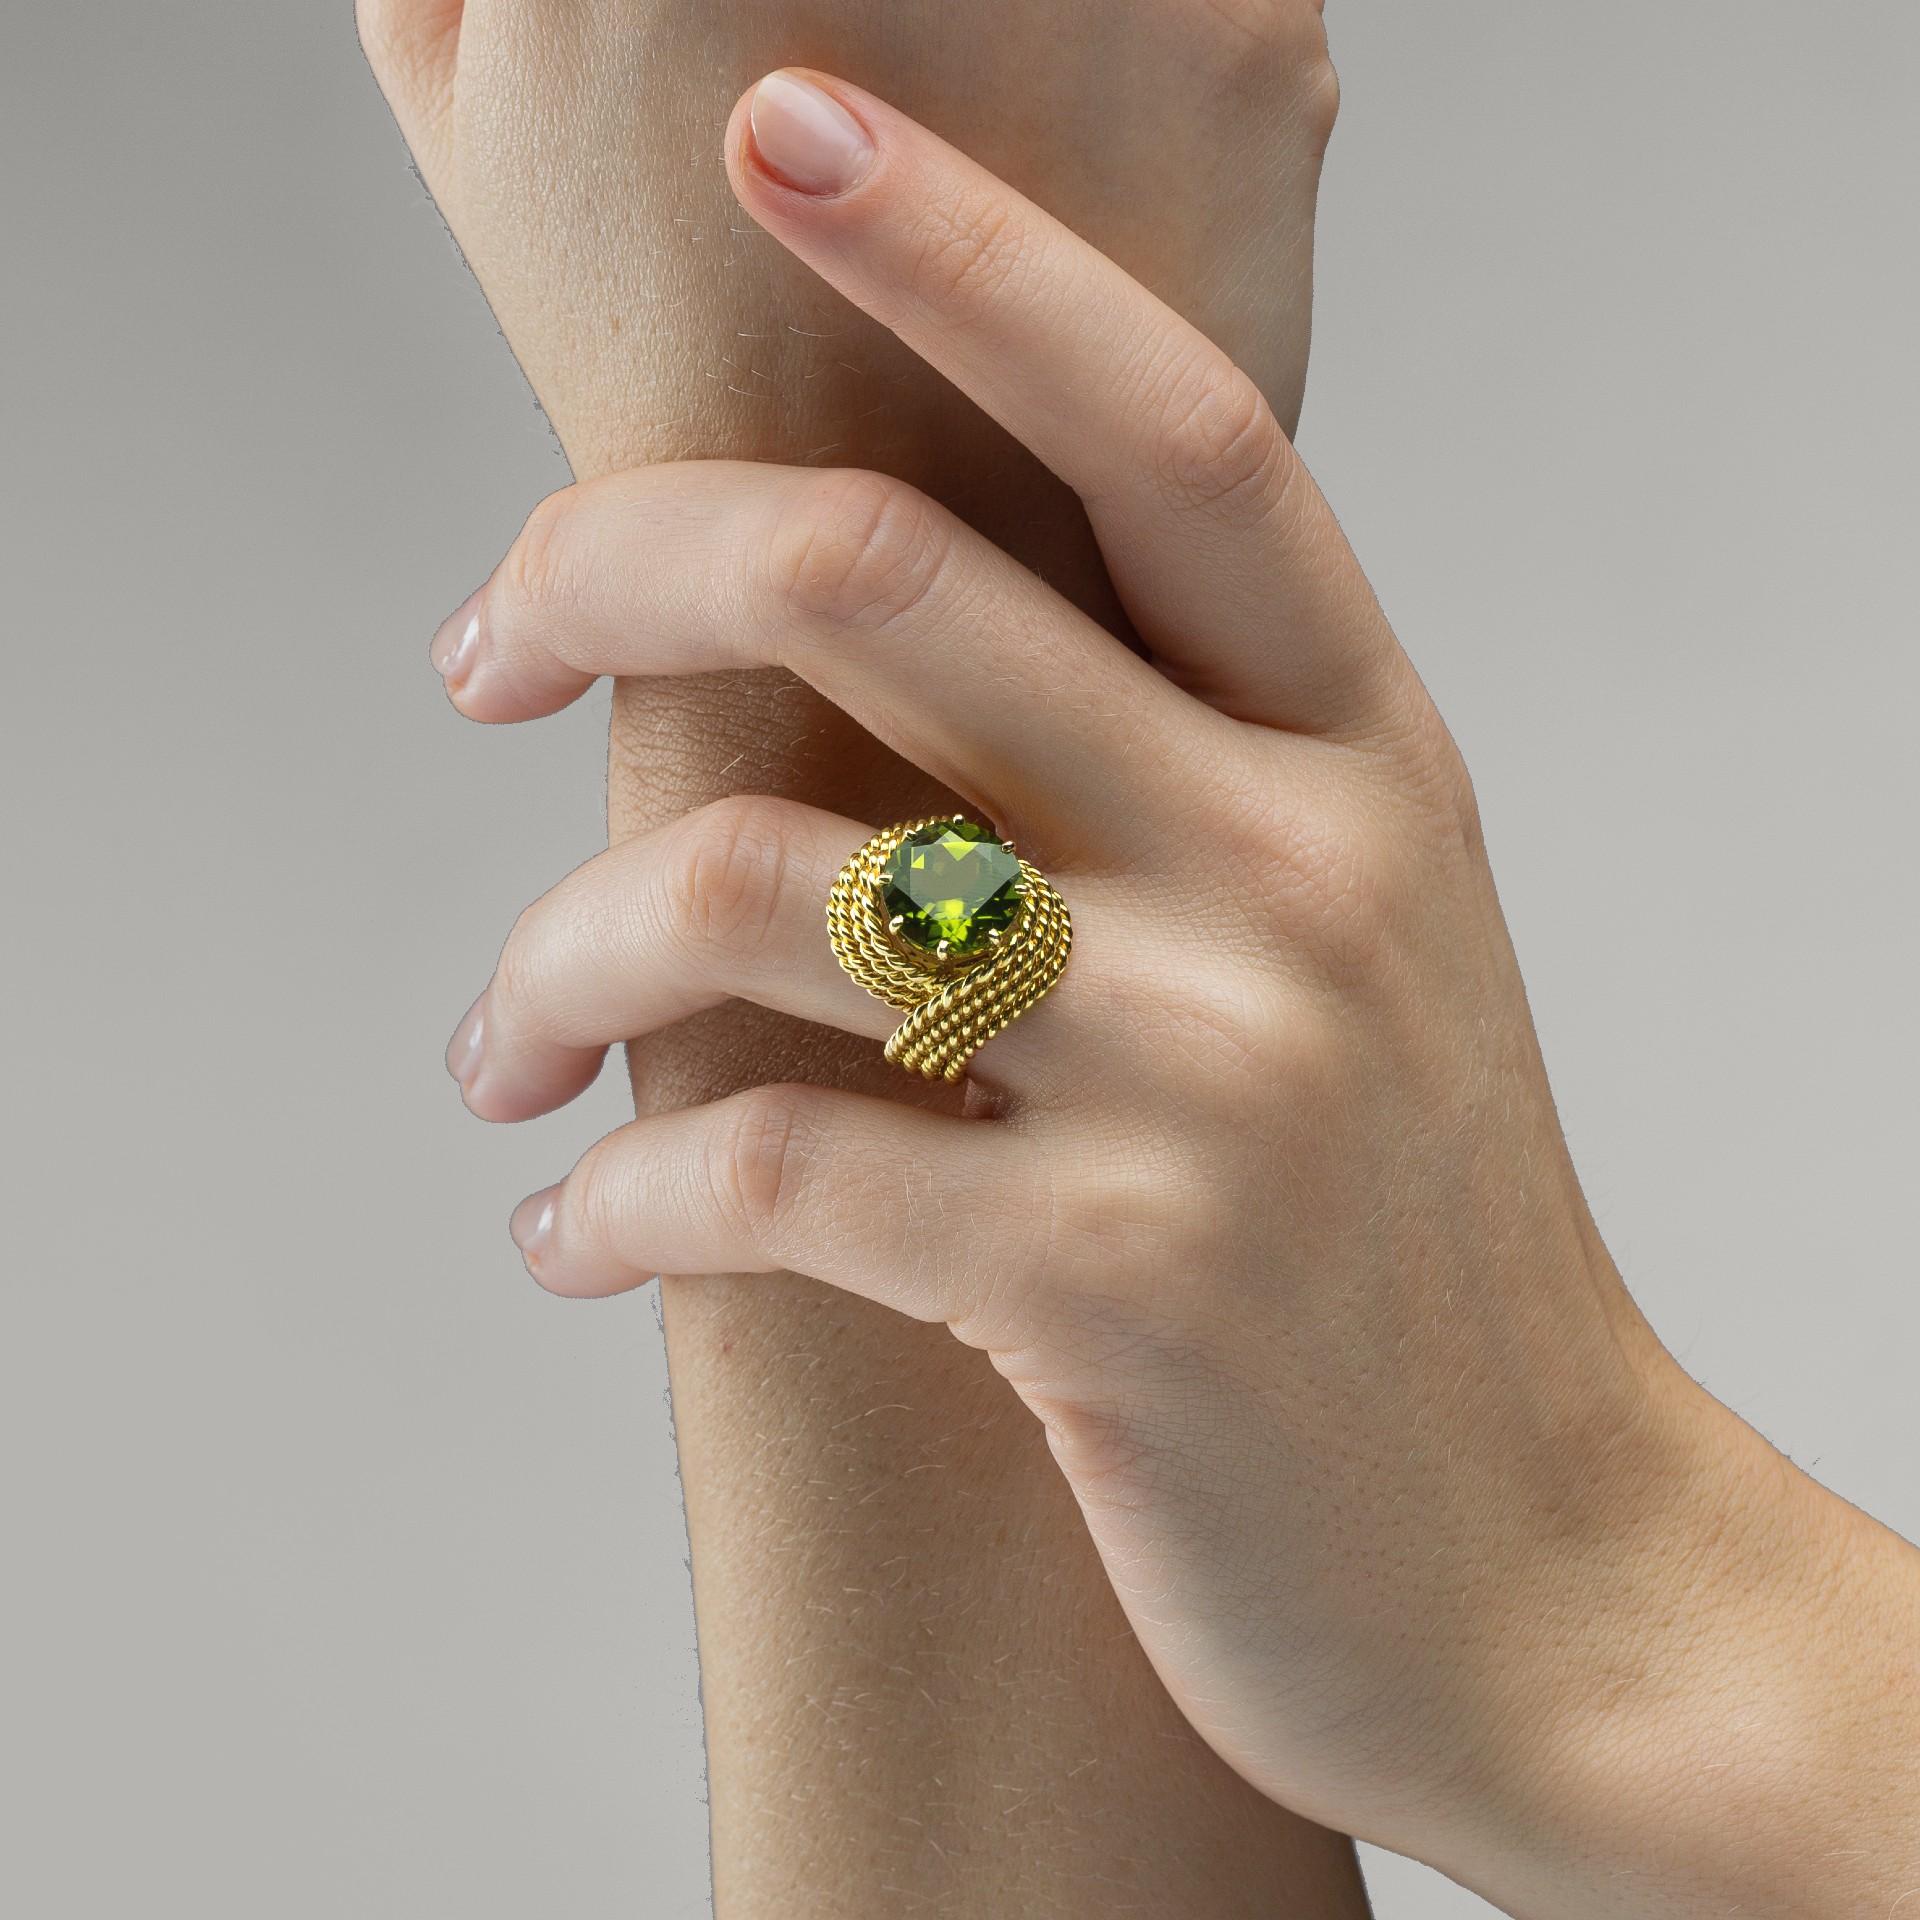 Alex Jona design collection, hand crafted in Italy, 18 karat yellow gold Nou Nou ring centering a 6.50 carats round cut peridot, wrapped by twisted wire gold threads.

Alex Jona jewels stand out, not only for their special design and for the